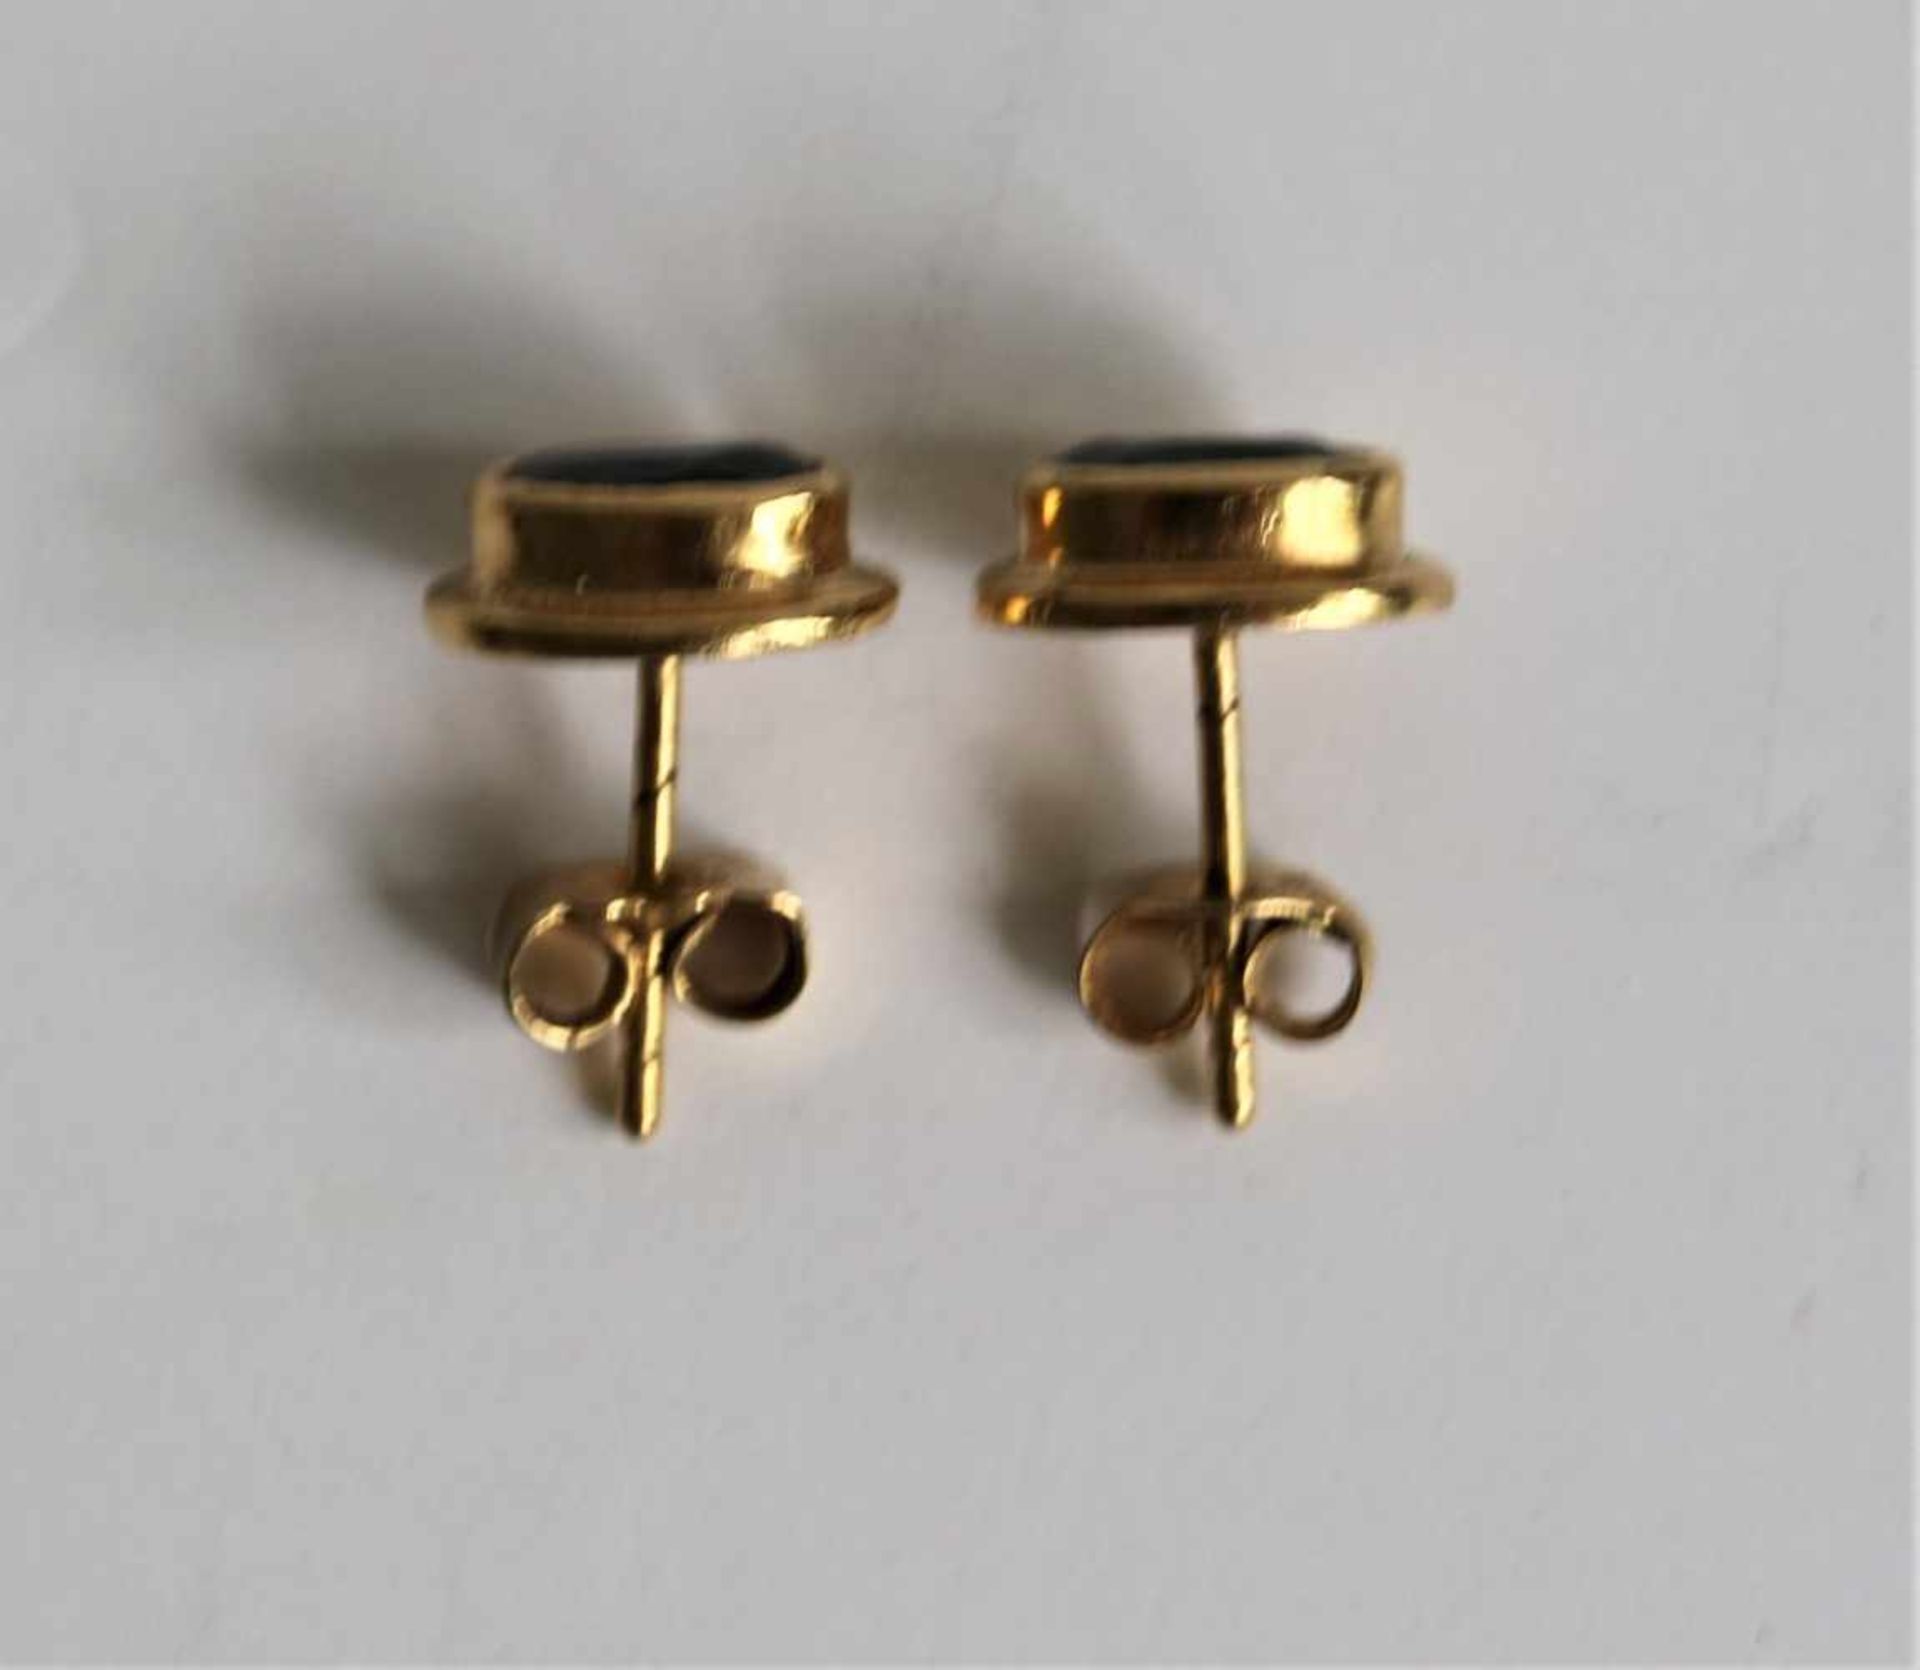 Gold sapphire earrings 18 Kt 0,9 x 0,7 x 1,5 cm - Image 2 of 2